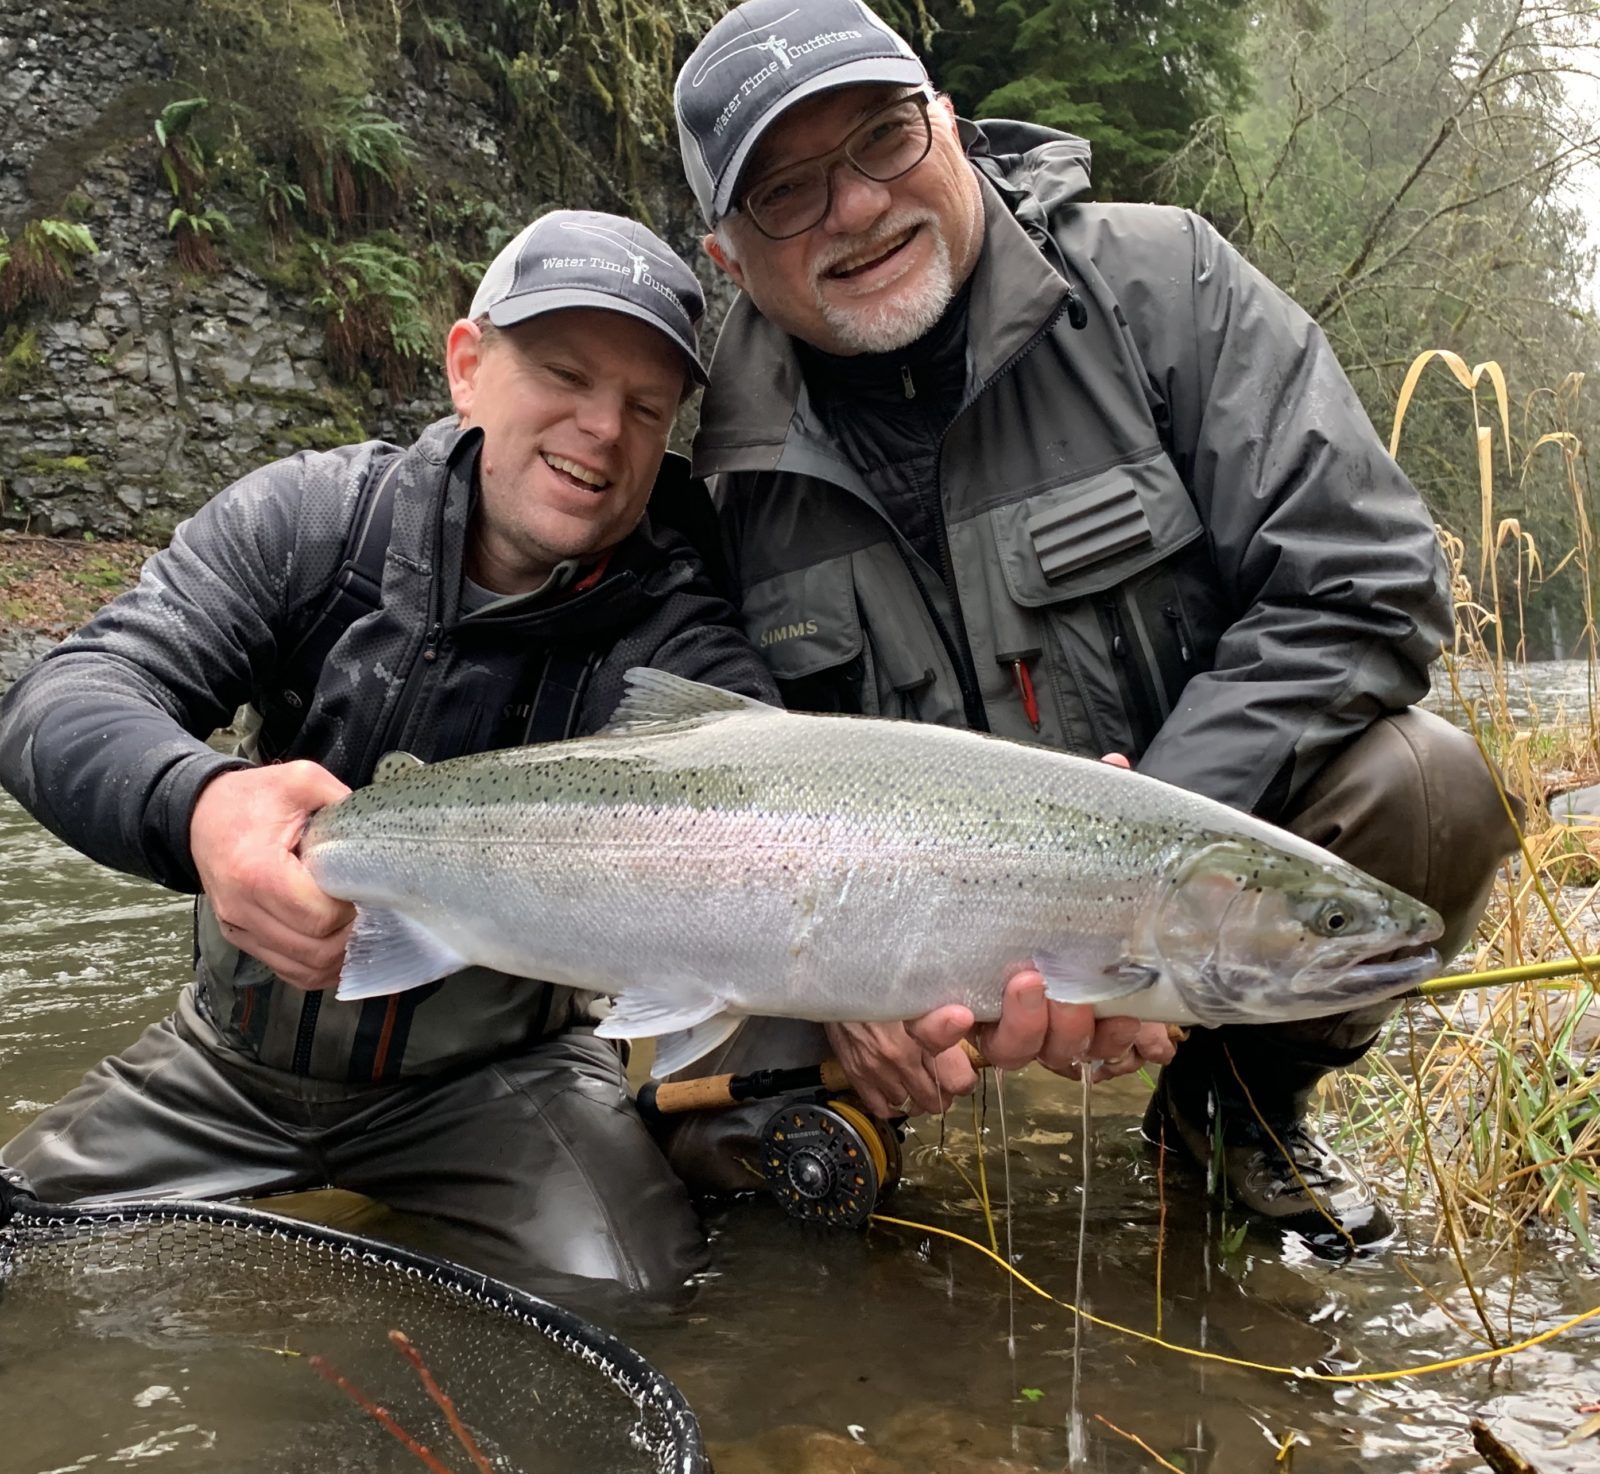 Simms Fish It Well Ca - Fly Fishing Outfitters